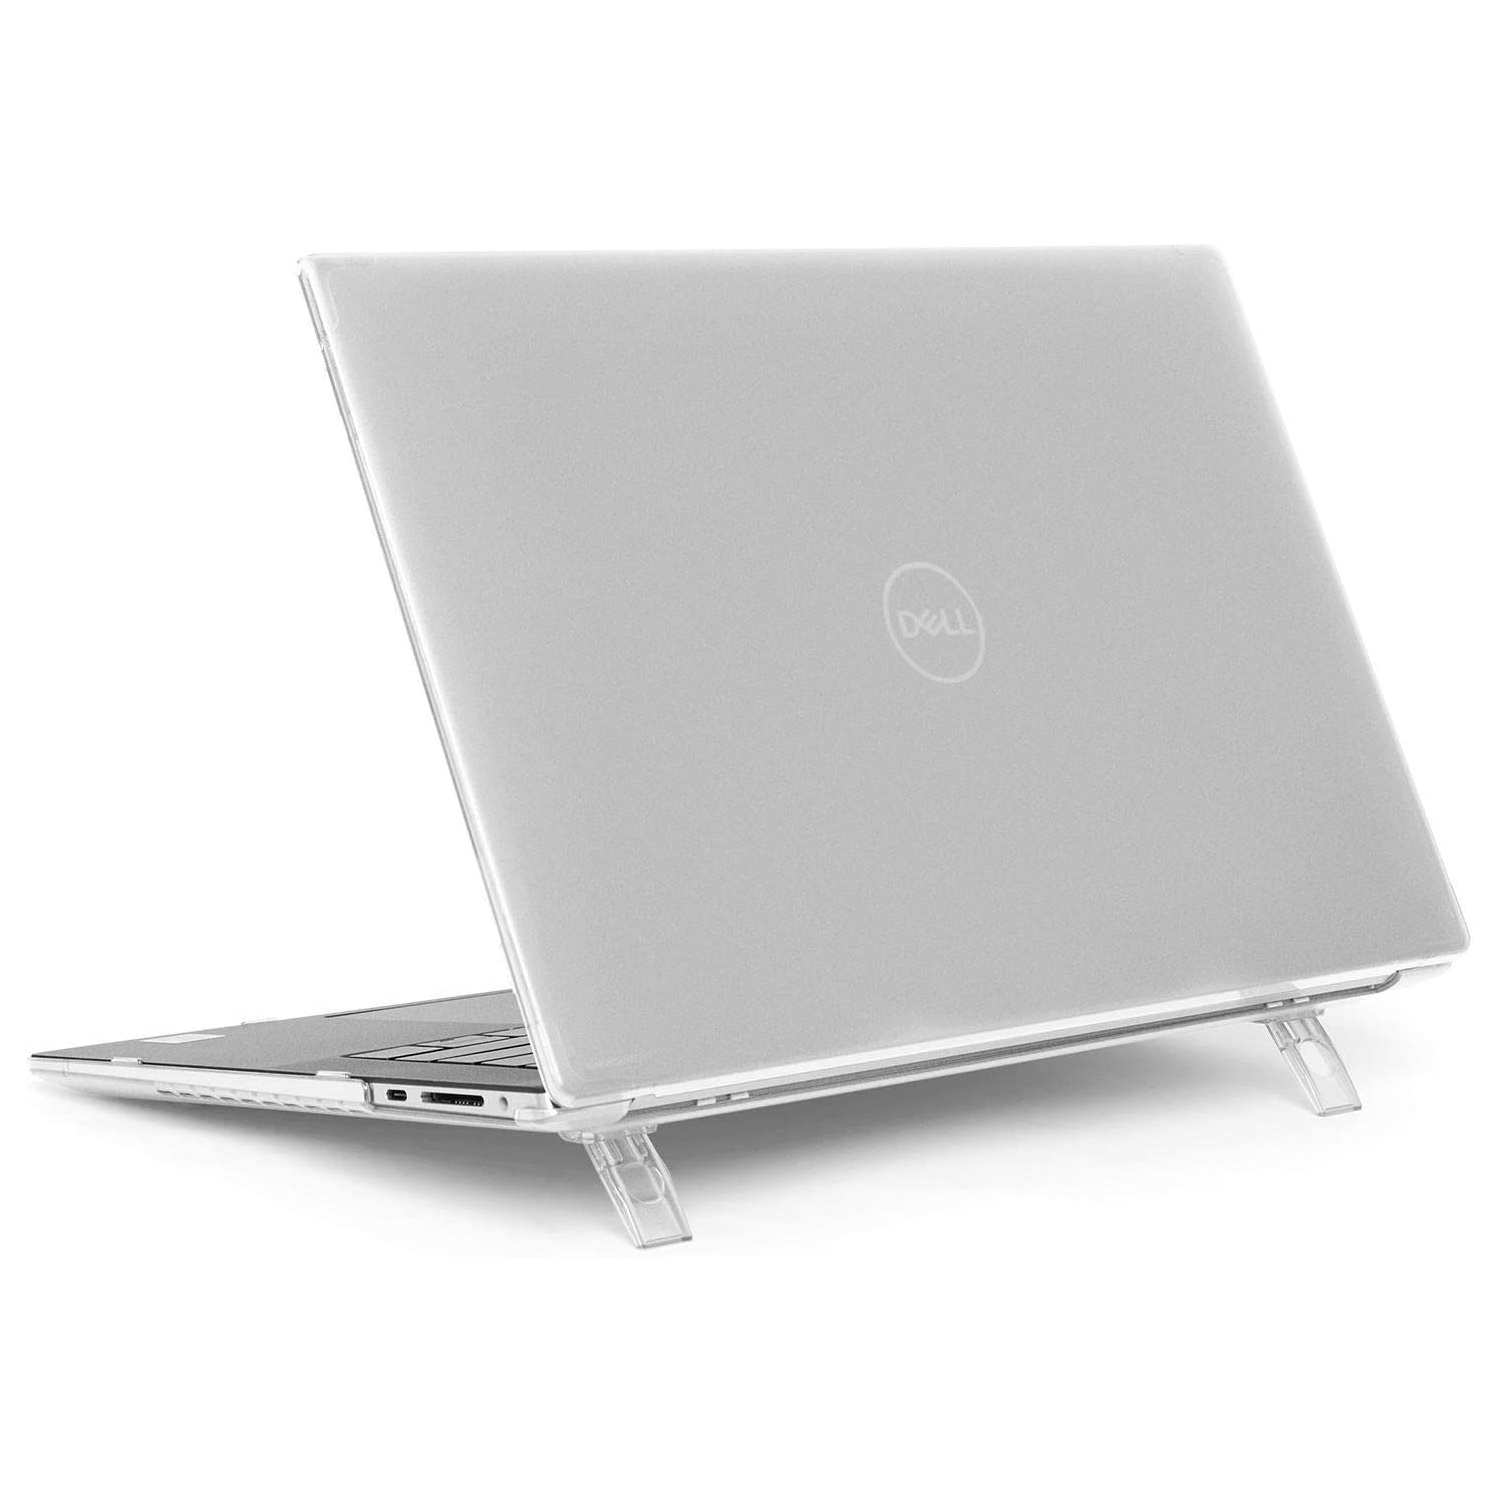 Case Compatible for 2020-2022 15.6' Dell XPS 15 9500 9510 9520 / Precision 5550 5560 5570 Series Laptop Computer ONLY (NOT Fitting Other Dell Models) - Clear